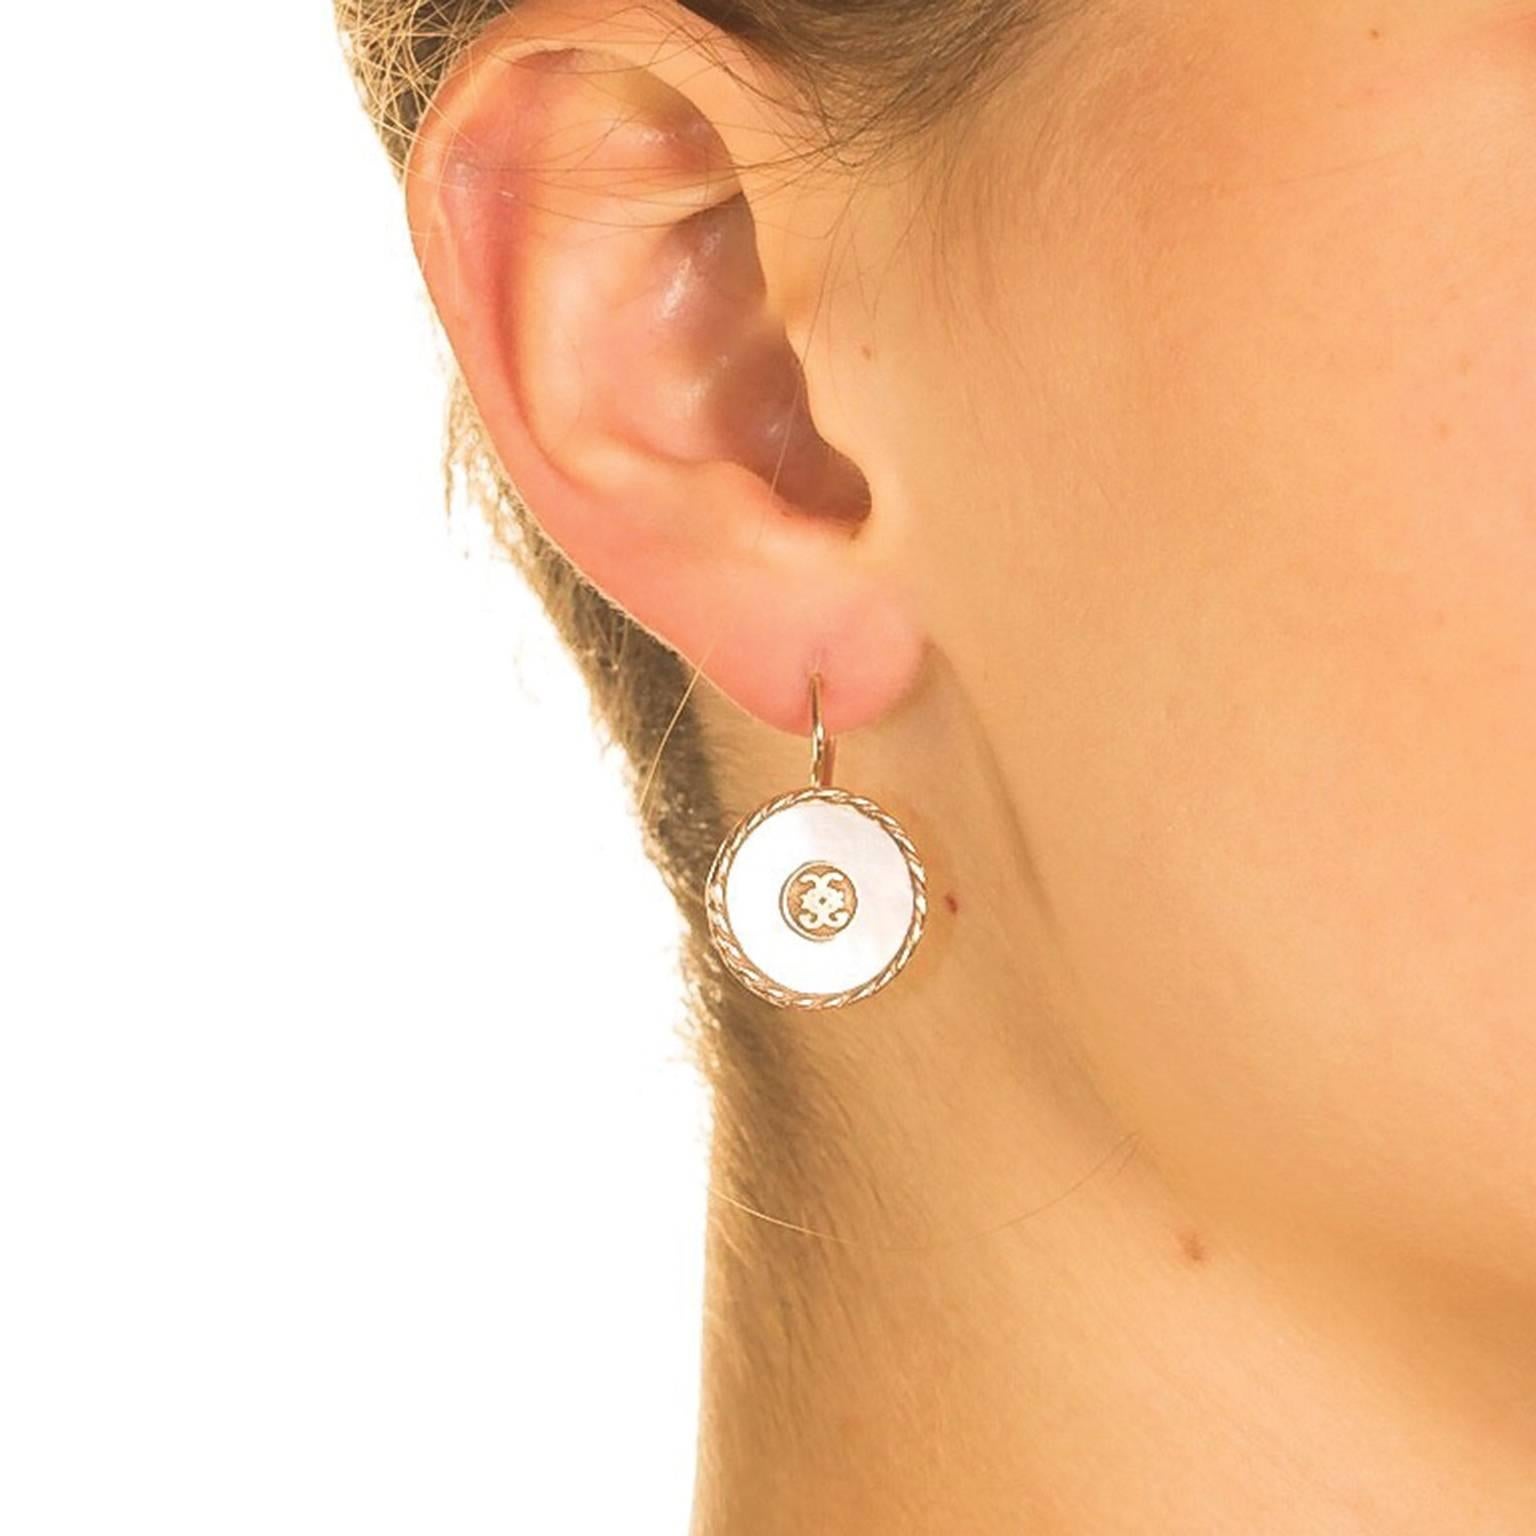 Classic and classy, these graceful earrings are the embodiment of simple elegance.  A ‘CdG’ coat of arms is engraved in 18 karat yellow gold vermeil and set in a shimmering white pool of mother of pearl.  This sophisticated composition is completed